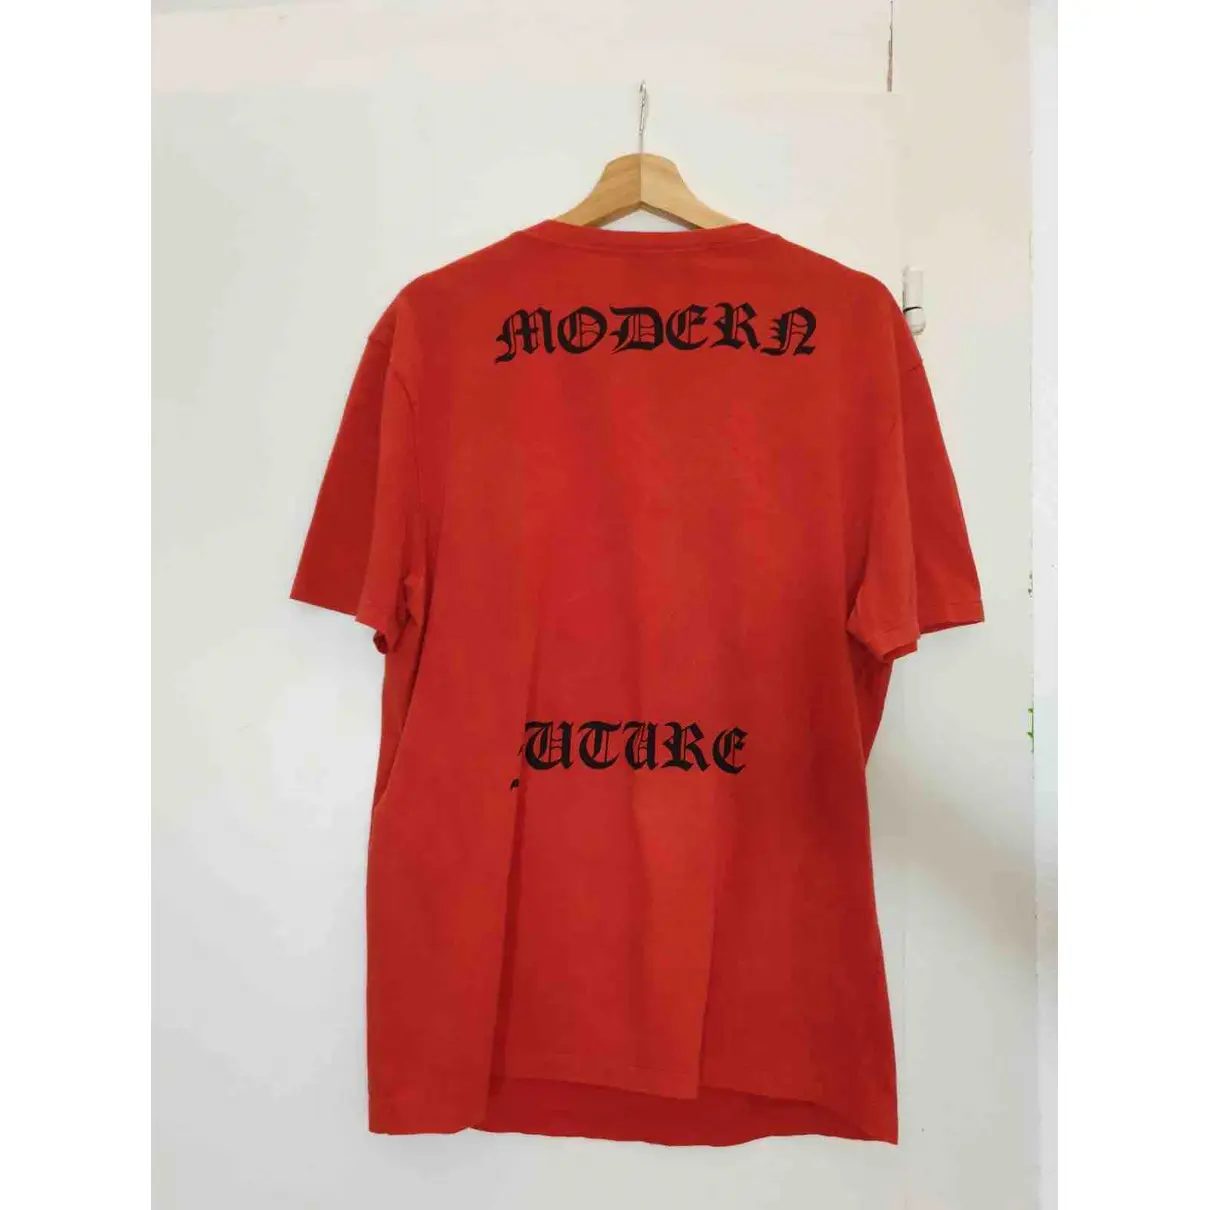 Buy Gucci Red Cotton T-shirt online